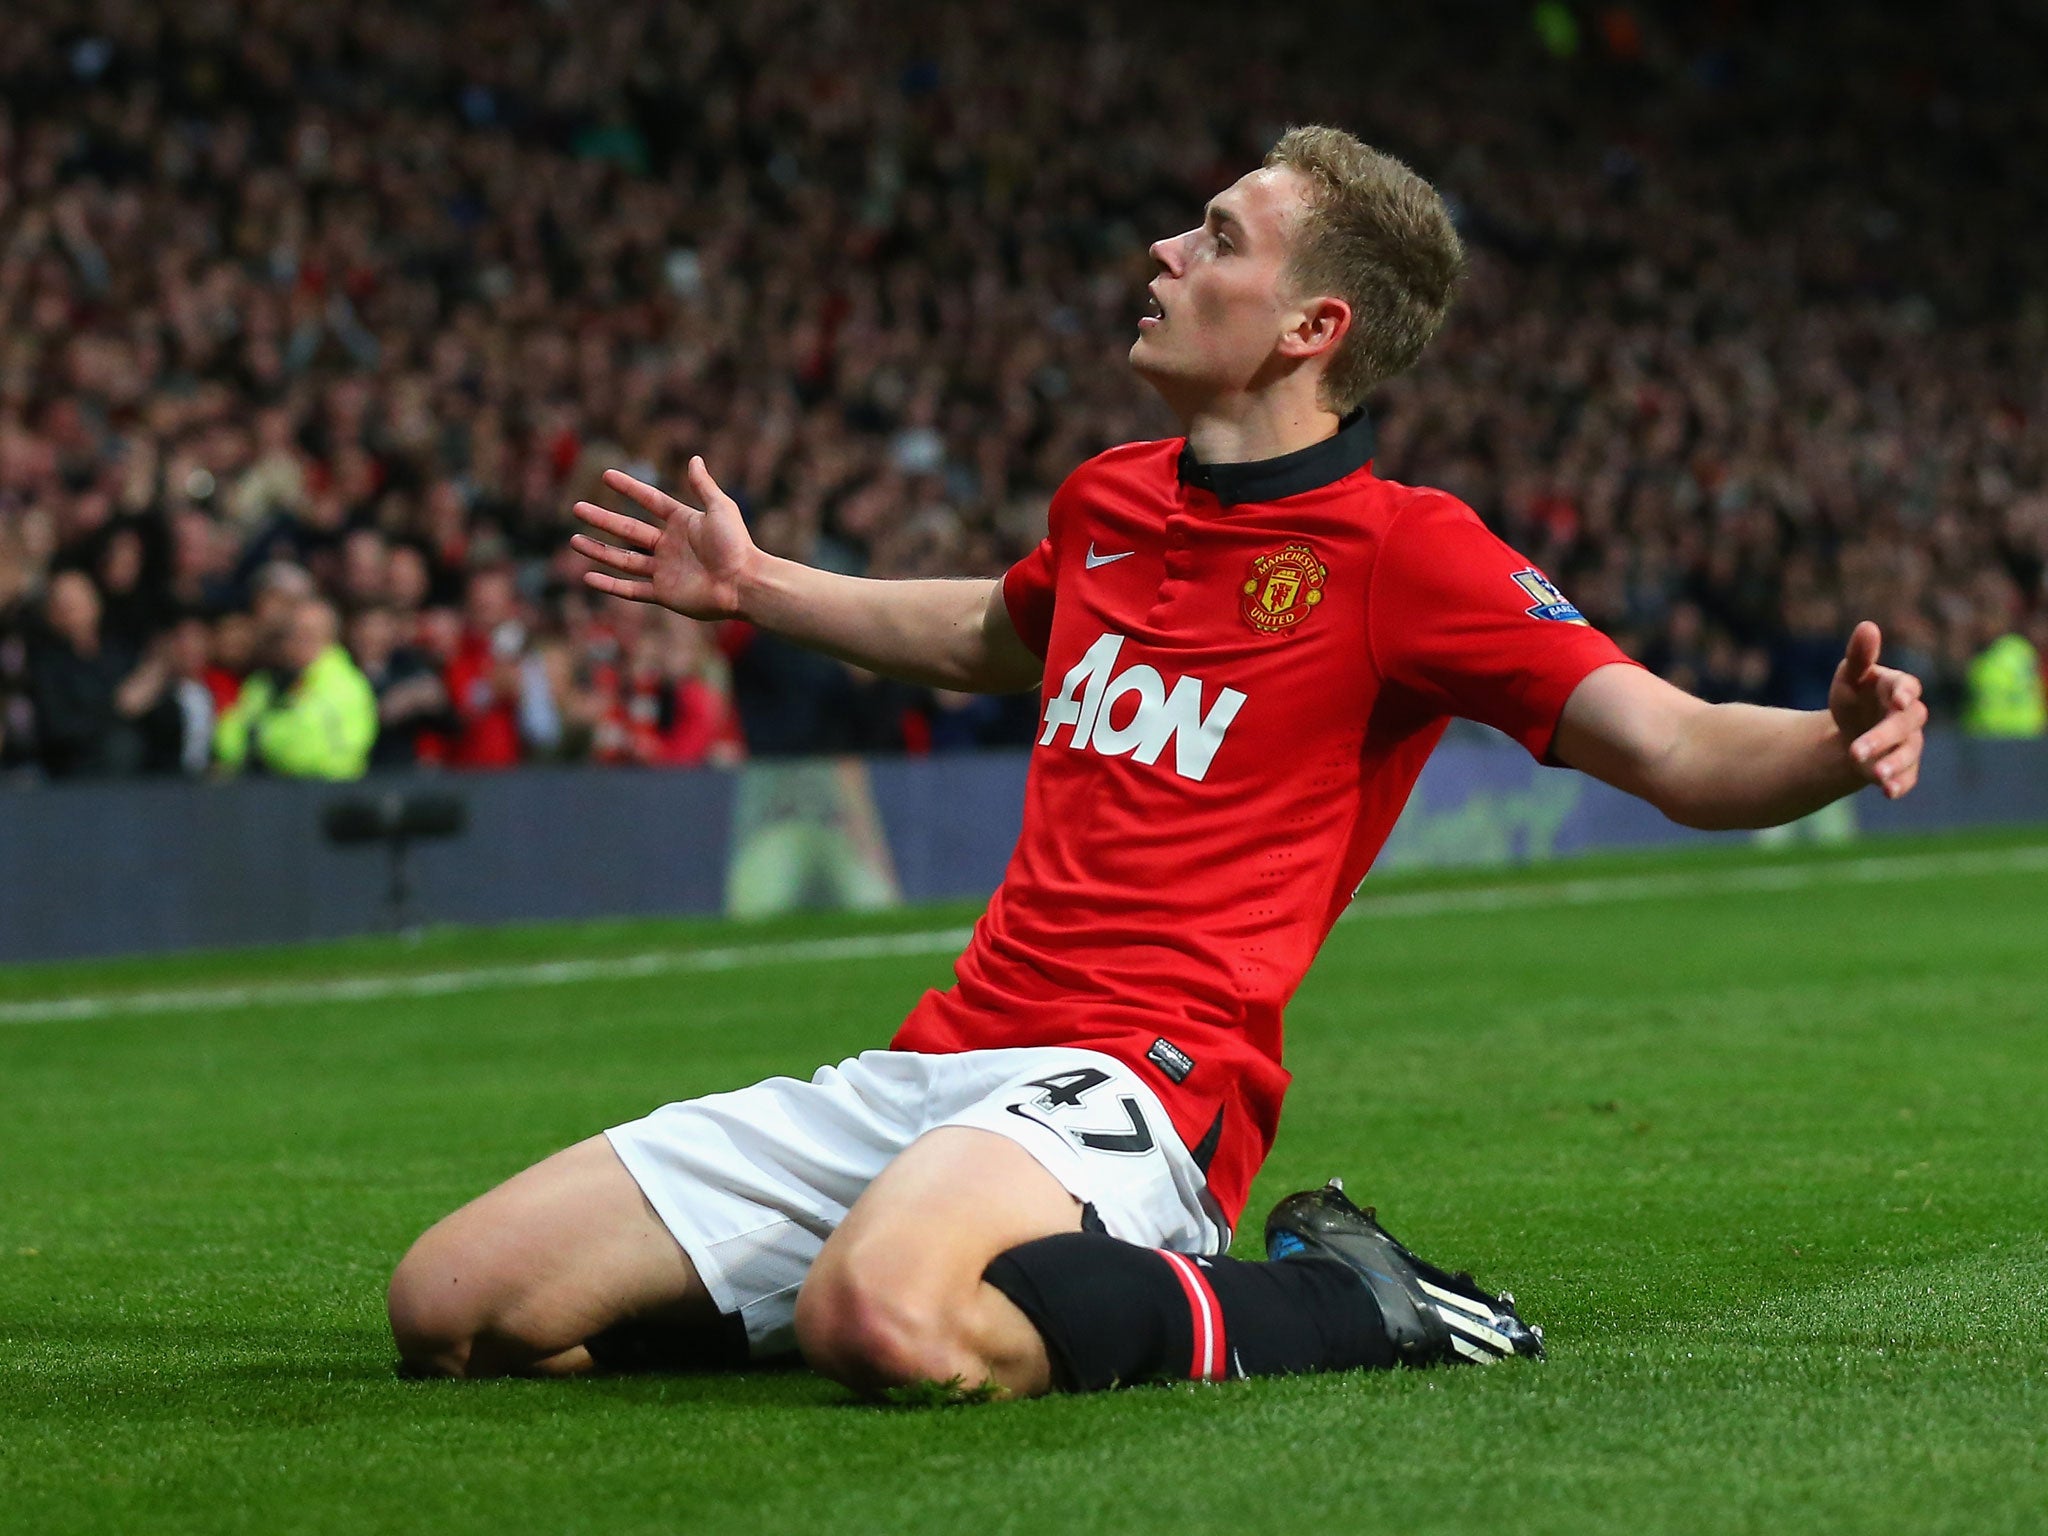 James Wilson says 'nothing can compare' to dream Manchester United